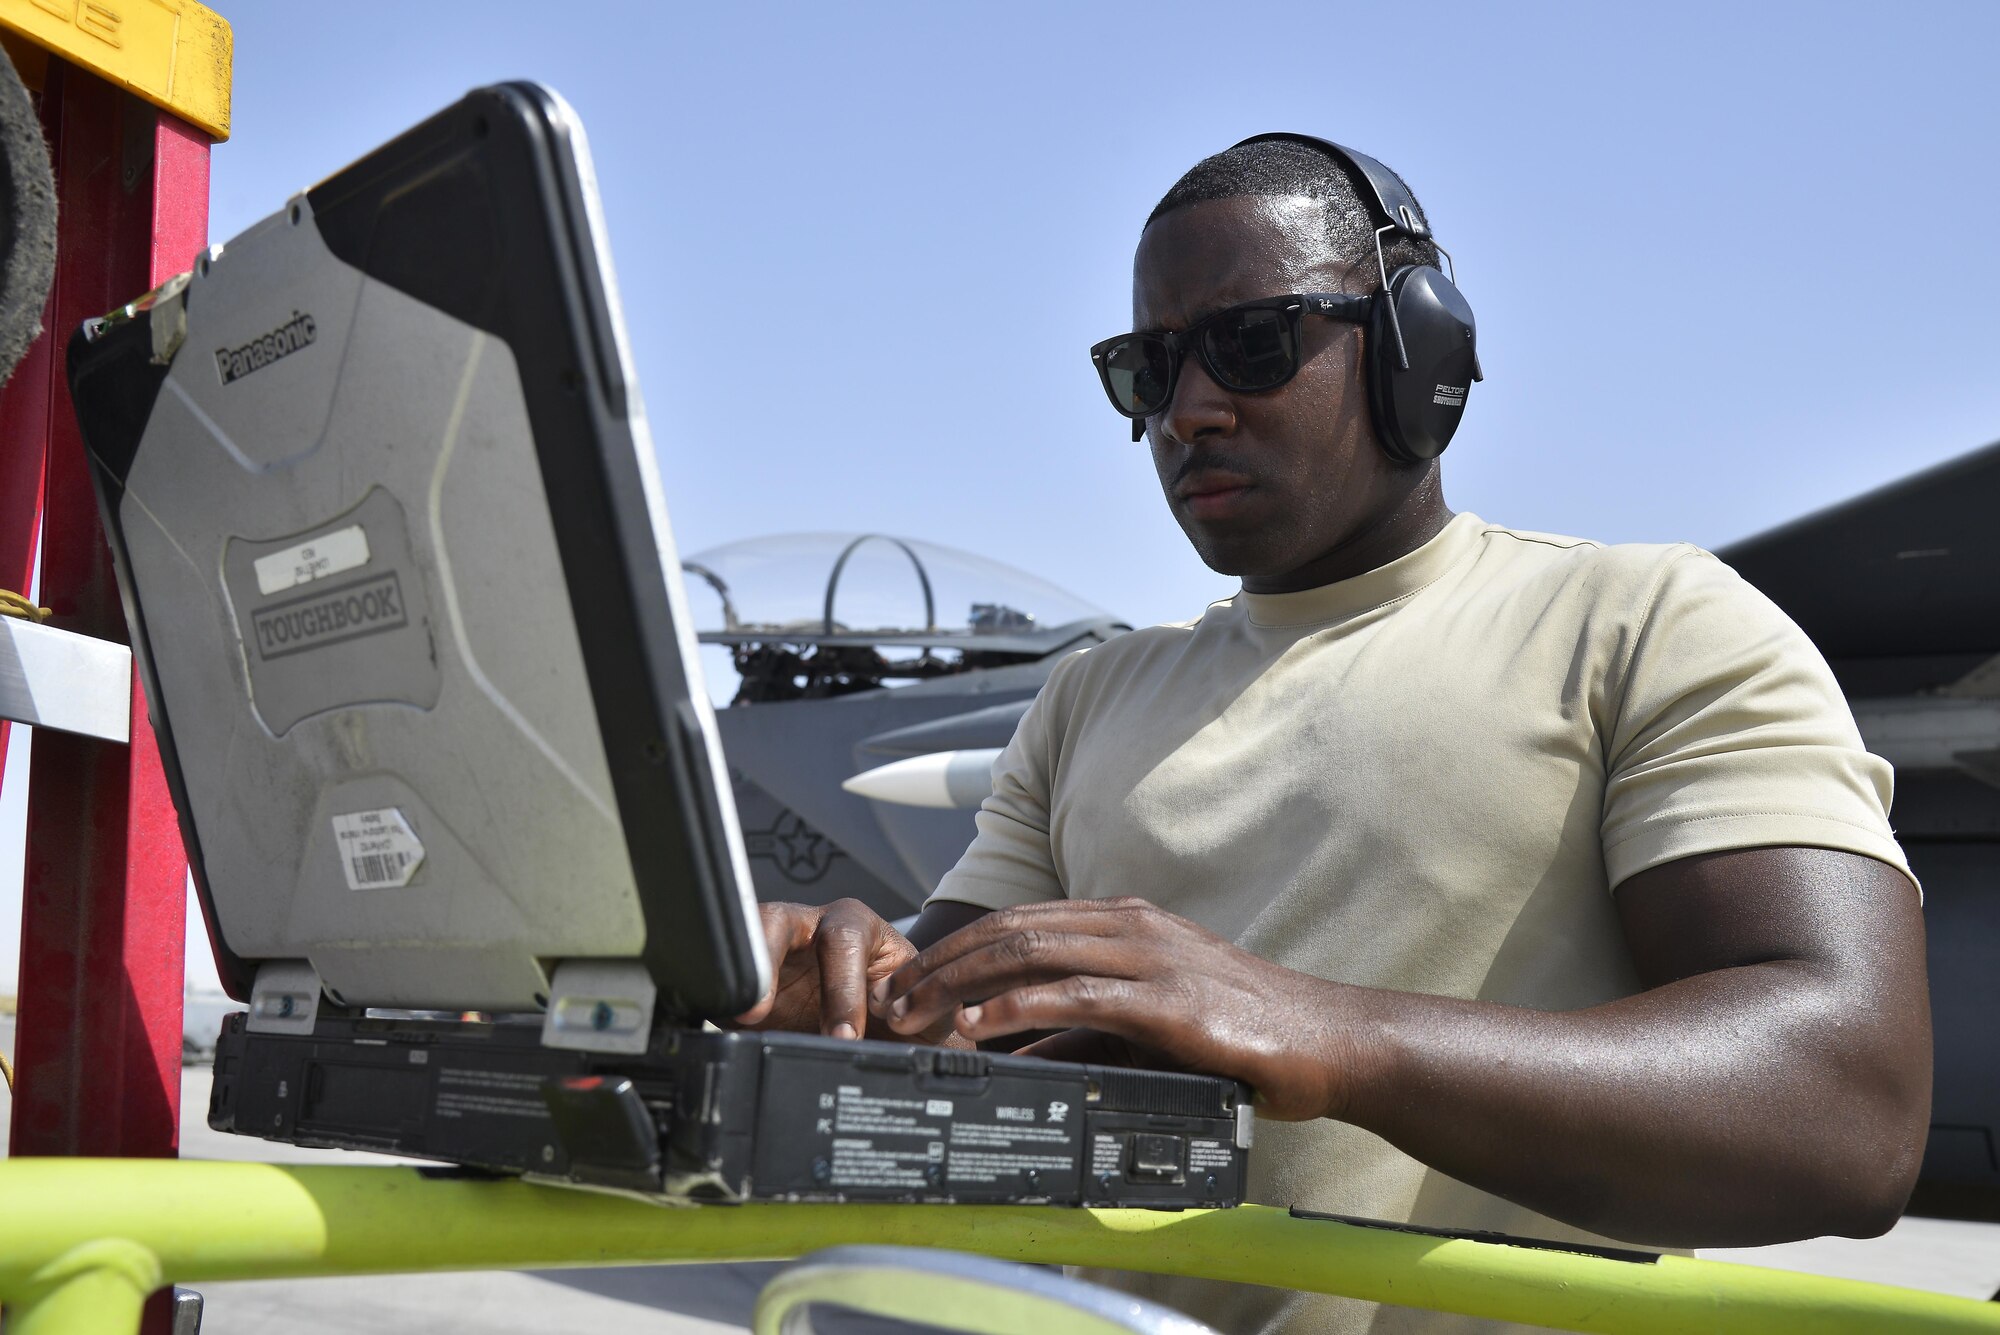 Staff Sgt. Oren reviews technical orders prior to launching an F-15E Strike Eagle at an undisclosed location in Southwest Asia May 31, 2015. Technical orders are step-by-step procedures used by maintenance personnel to repair, adjust and launch aircraft. Sgt. Oren is a dedicated crew chief assigned to the 380th Expeditionary Aircraft Maintenance Squadron. (U.S. Air Force photo/Tech. Sgt. Christopher Boitz) 